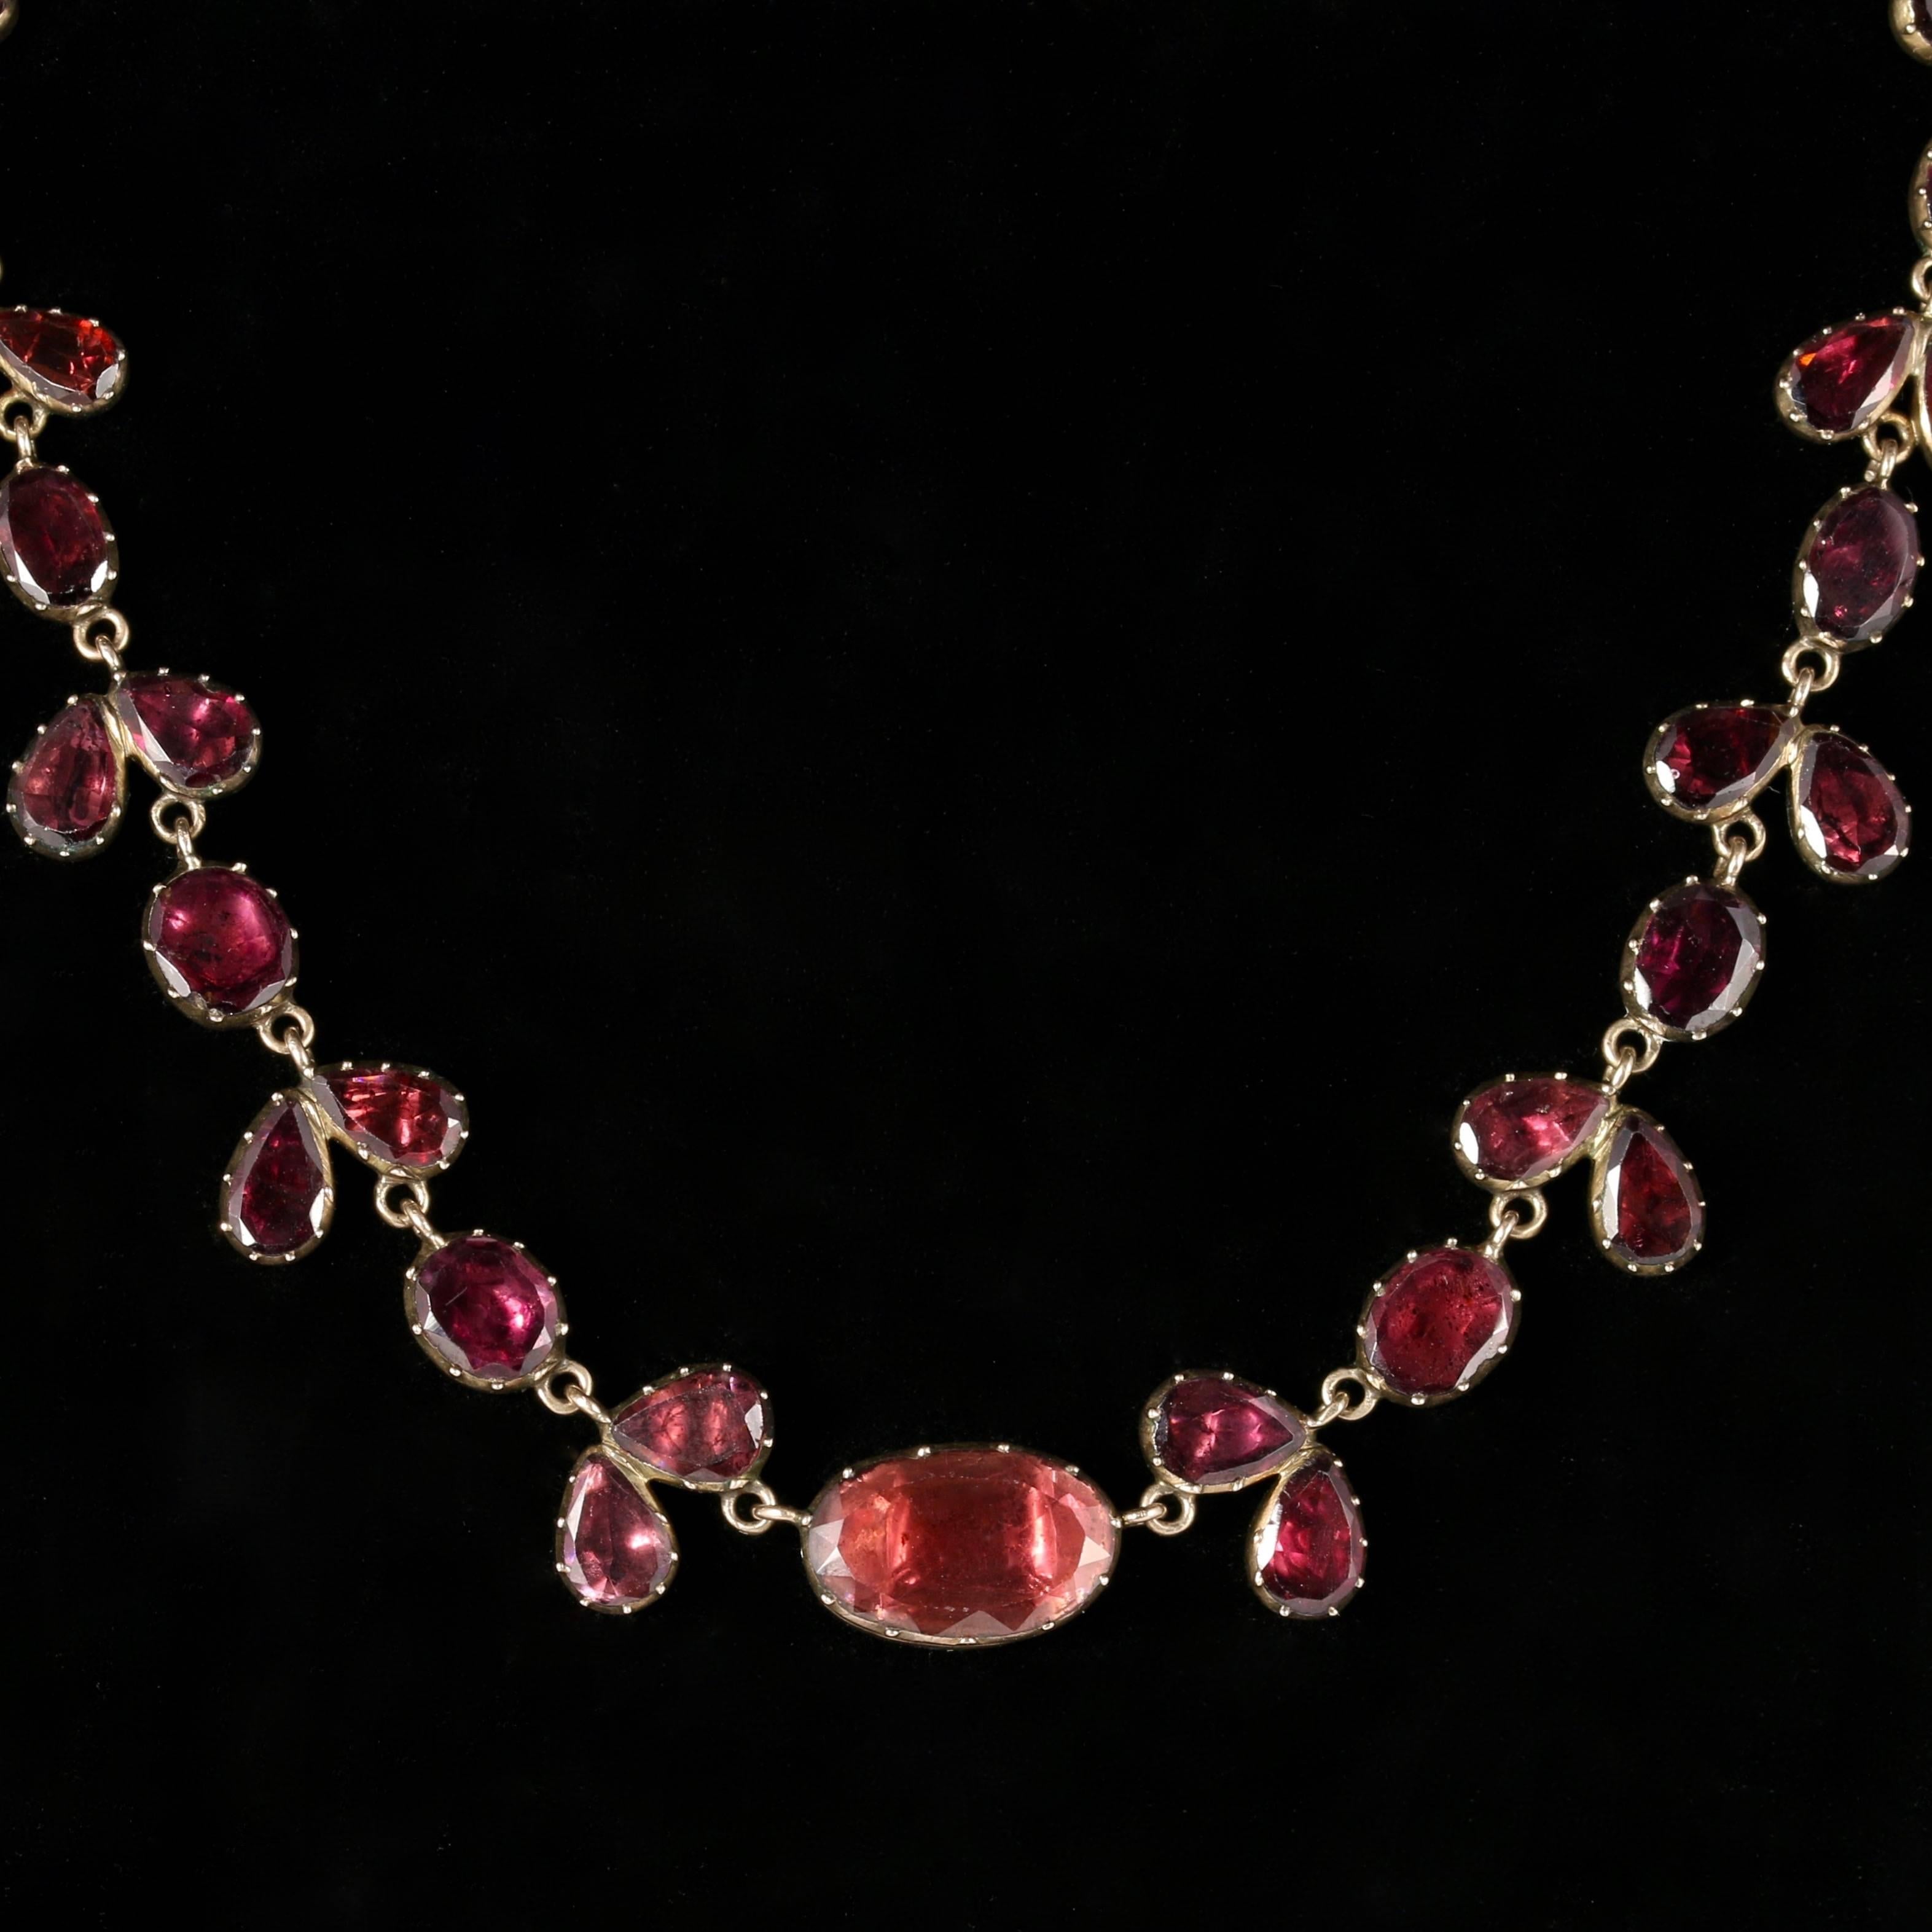 To read more please click continue reading below-

This stunning antique 18ct Gold Georgian flat cut Garnet Riviere Necklace is Circa 1790. 

Due to its age, Georgian jewellery is quite rare, with some pieces almost three hundred years old. From